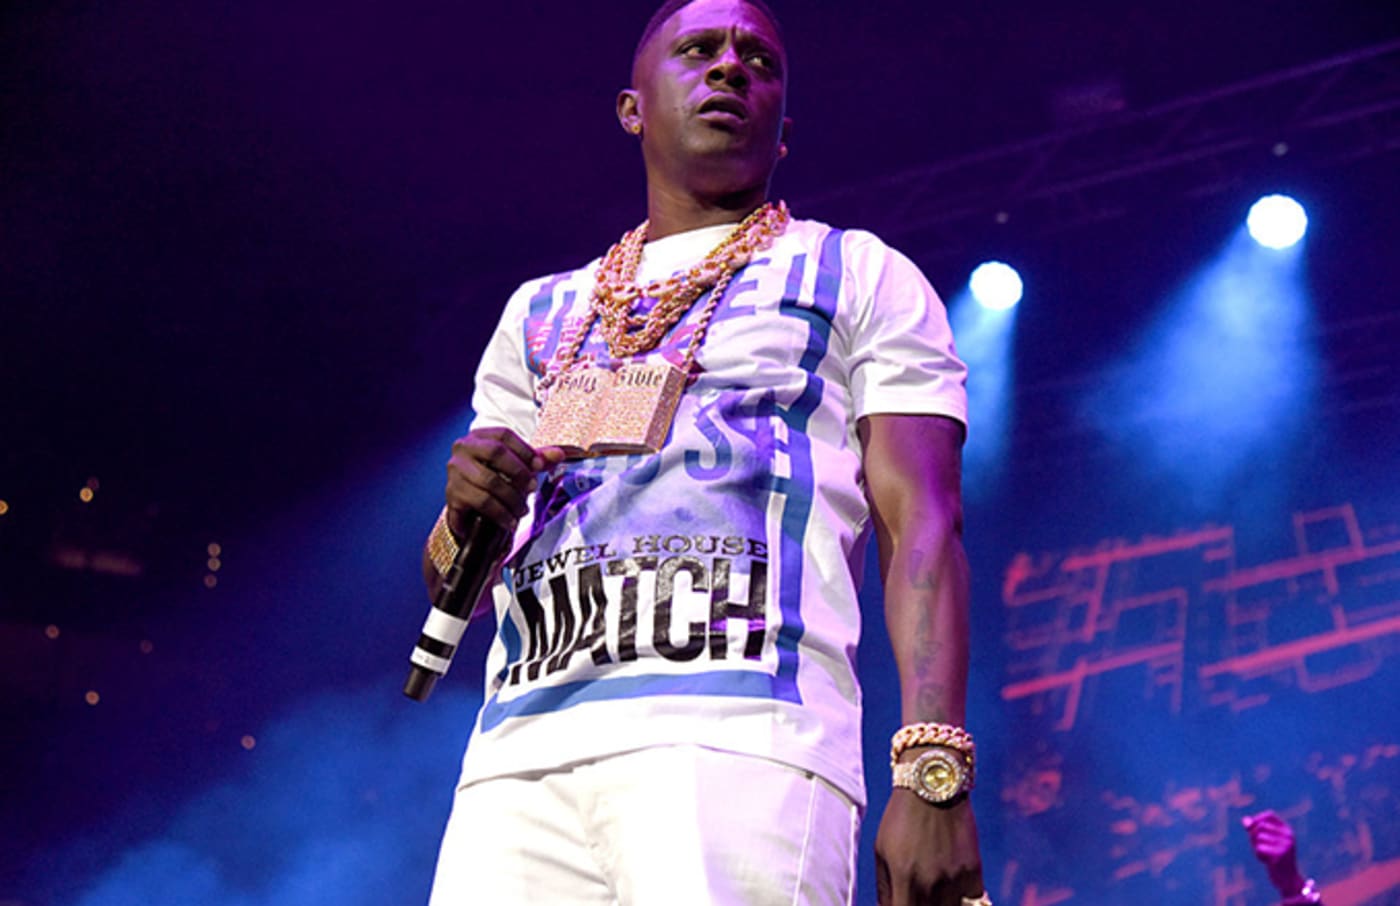 This is a photo of Boosie Badazz.